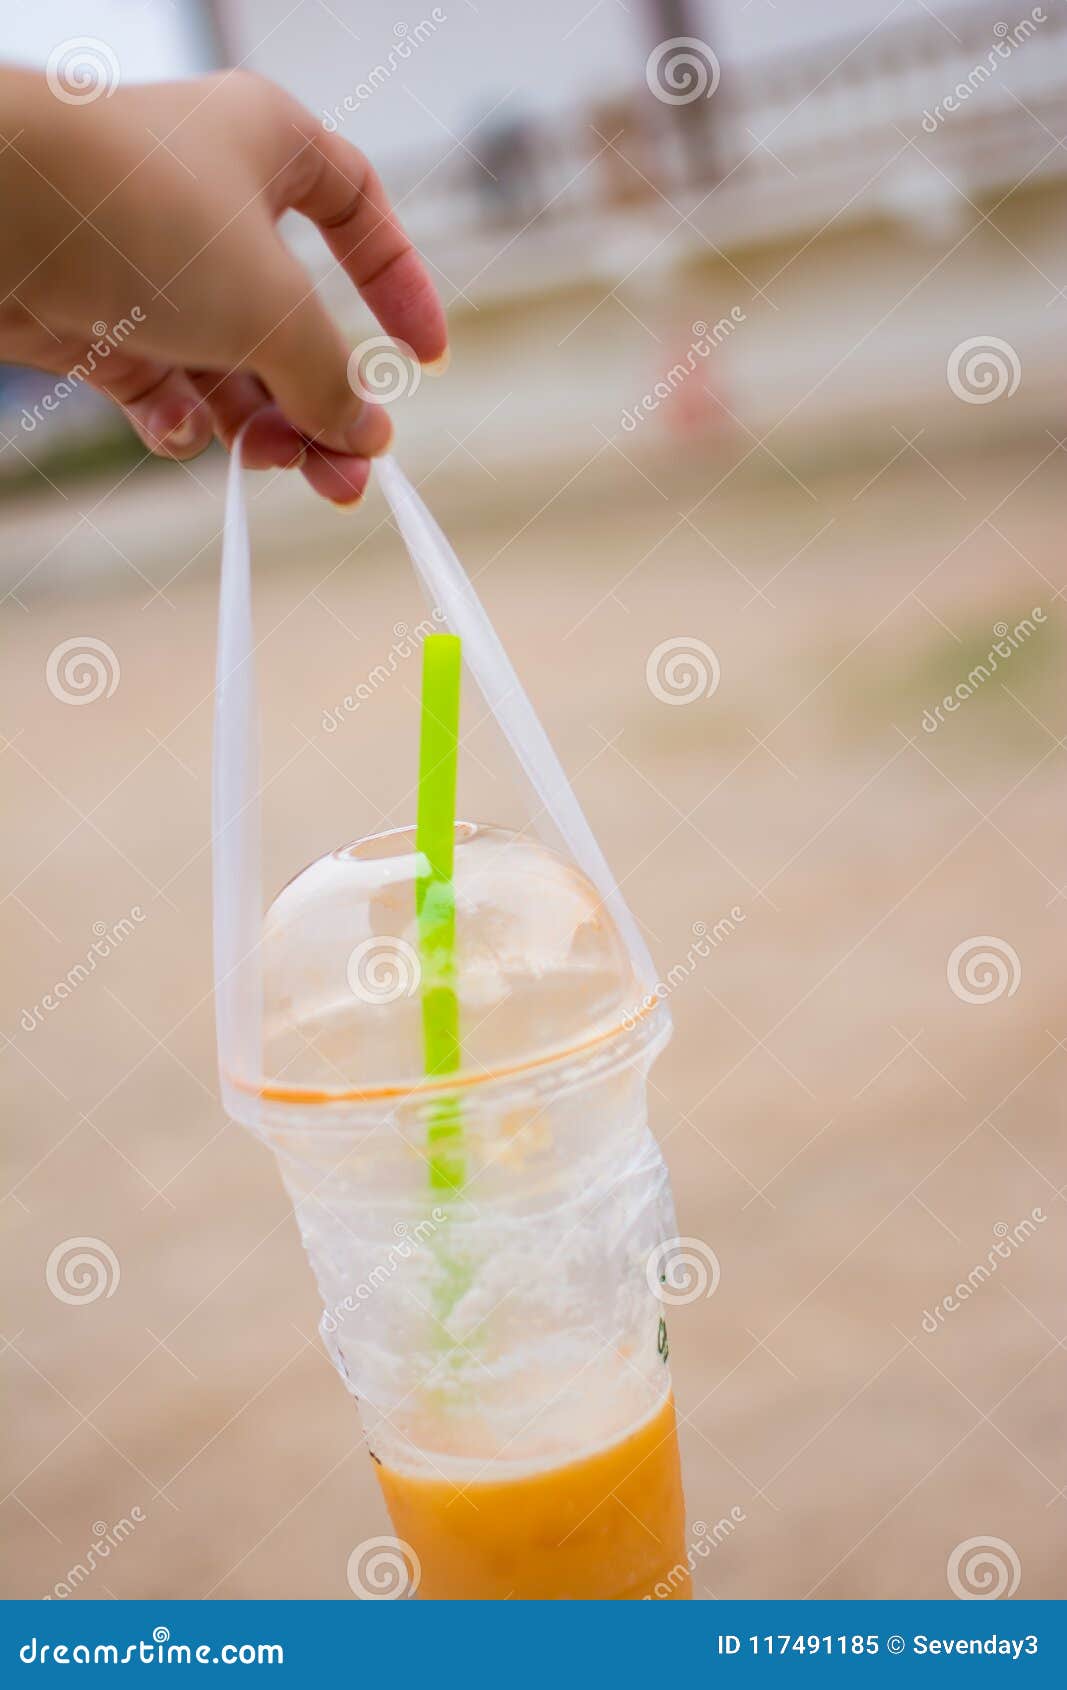 The Woman`s Hand is Holding a Plastic Cup of Thai Tea, Picture in ...